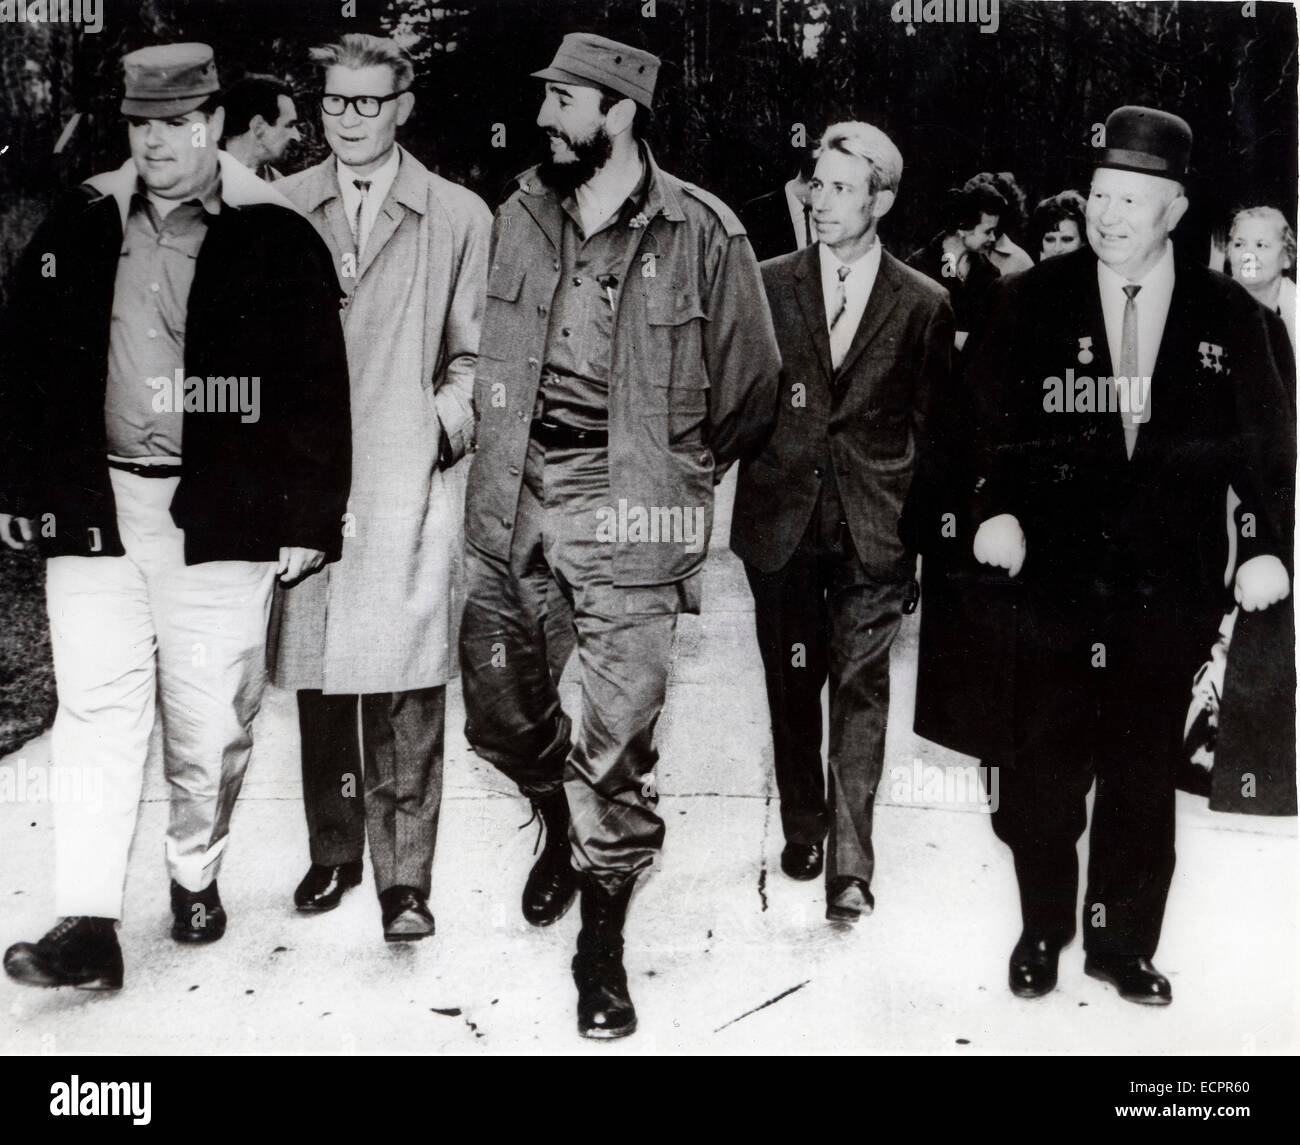 The US and Cuba announced an agreement between the two countries that will be a first step toward normalizing relations. PICTURED: Feb. 16, 1965 - Havana, Cuba - FIDEL ALEJANDRO CASTRO RUIZ (born August 13, 1926) has been the ruler of Cuba since 1959, when, leading the 26th of July Movement, he overthrew the regime of Fulgencio Batista. PICTURED: Major Castro out walking with Emilio Navarro and NIKITA KHRUSHCHEV. © KEYSTONE Pictures USA/ZUMAPRESS.com/Alamy Live News Stock Photo